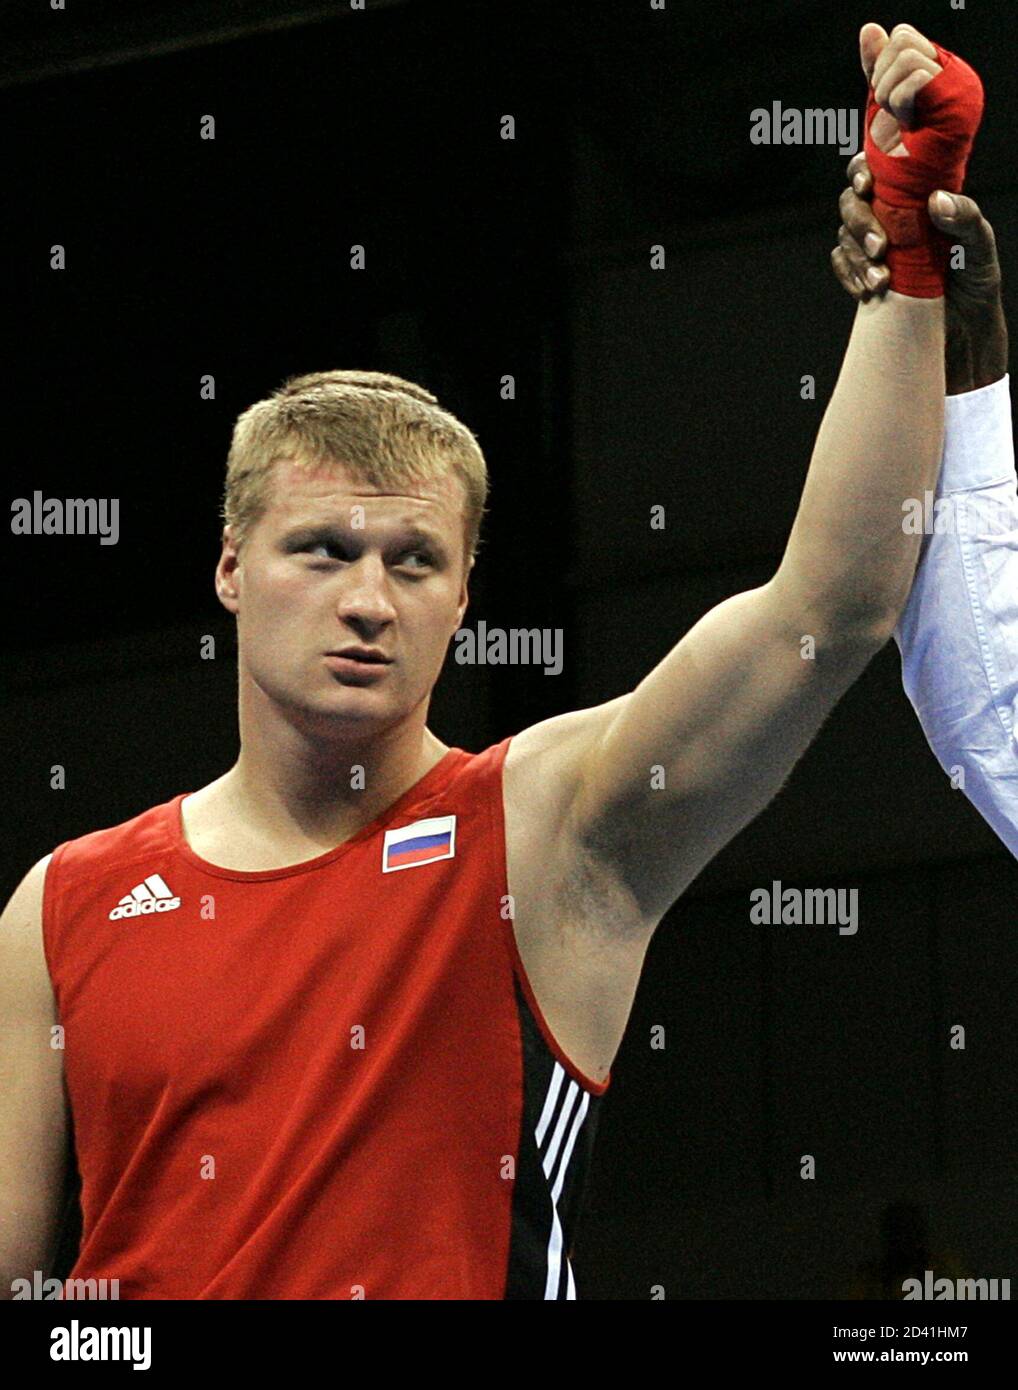 Russia's Alexander Povetkin celebrates victory in the men's boxing super heavyweight ( kg) final at the Athens 2004 Olympic Summer Games, August 29, 2004. Povetkin won his gold medal with a walkover. Stock Photo